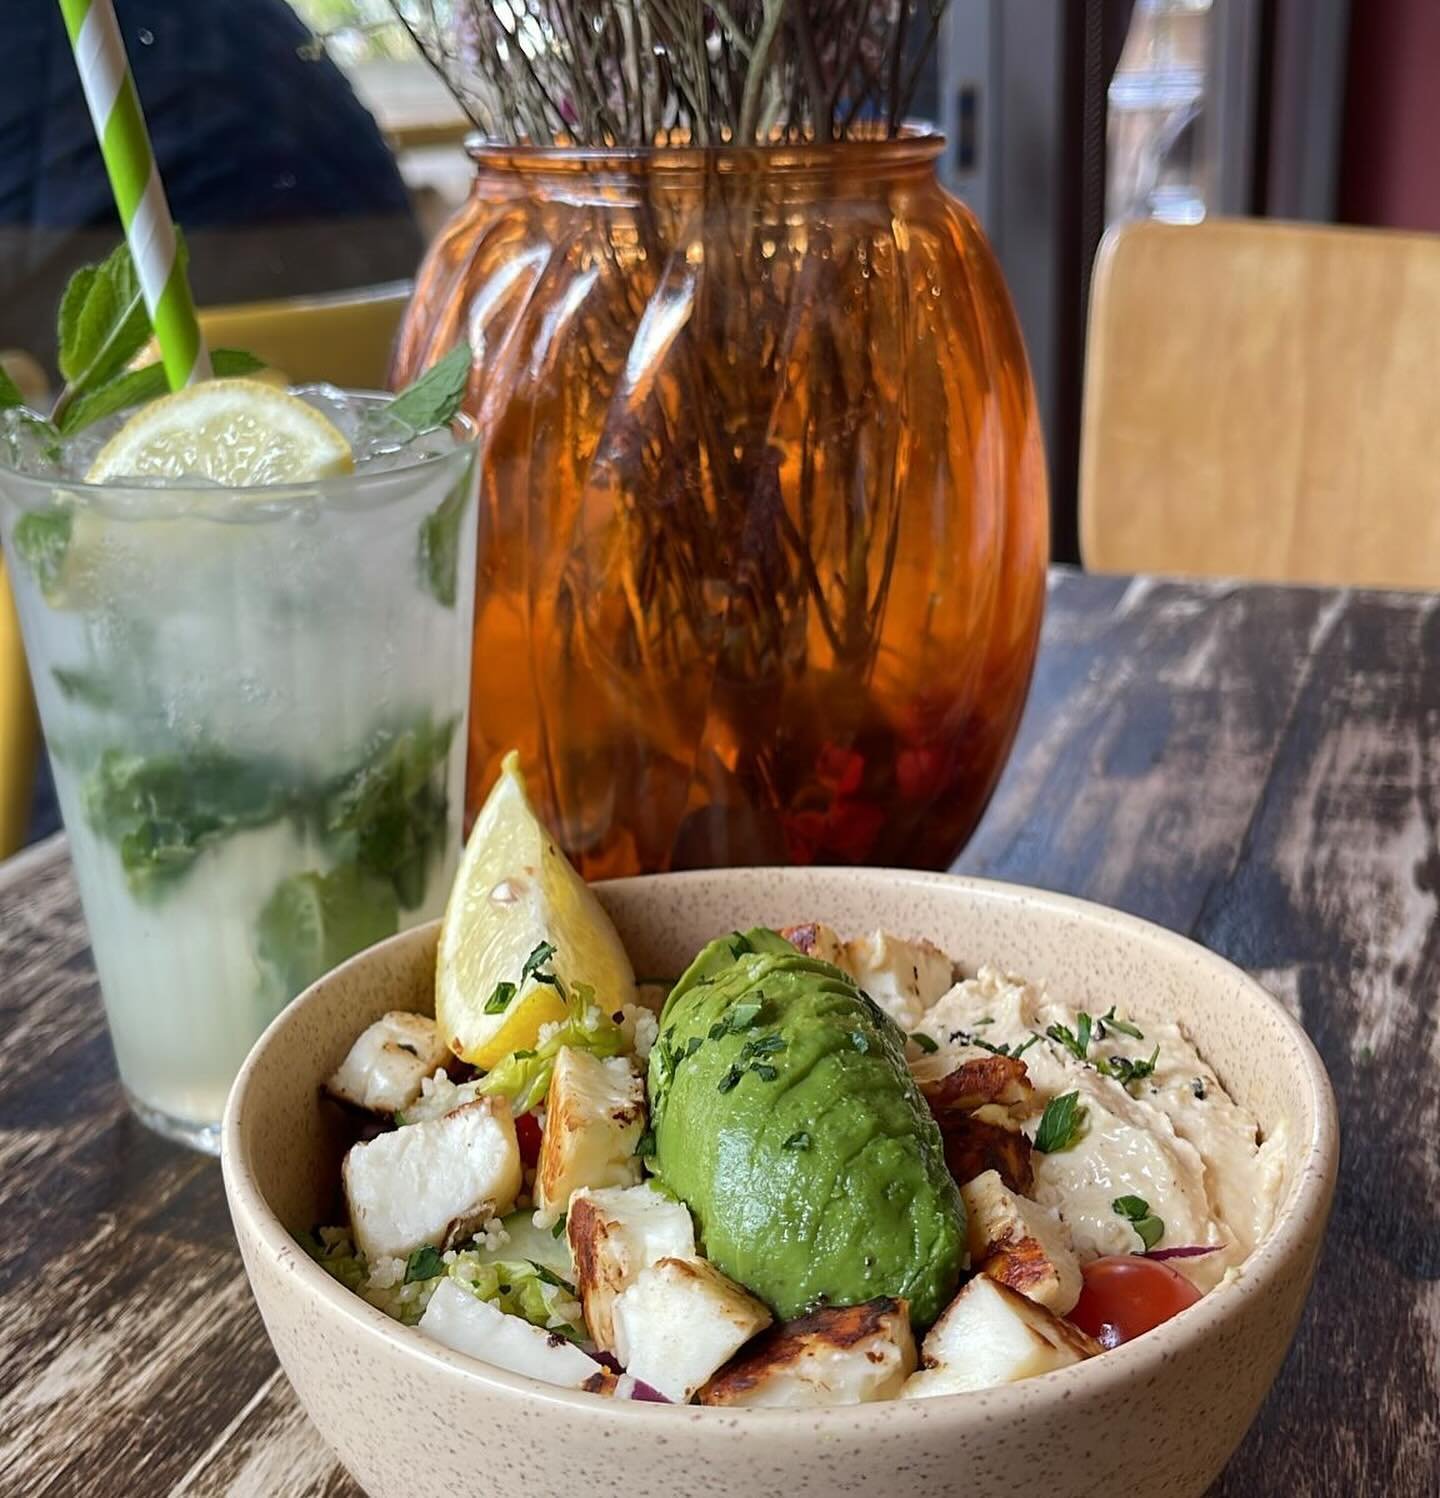 Happy hump day! 

Thinking about the weekend already? This delicious special is on at Boulangerie Jade Dulwich, paired with homemade lemonade 🍋 

Hummus, halloumi, avocado, red onion, couscous, cherry tomatoes, cucumber, lettuce and lemon. What&rsqu